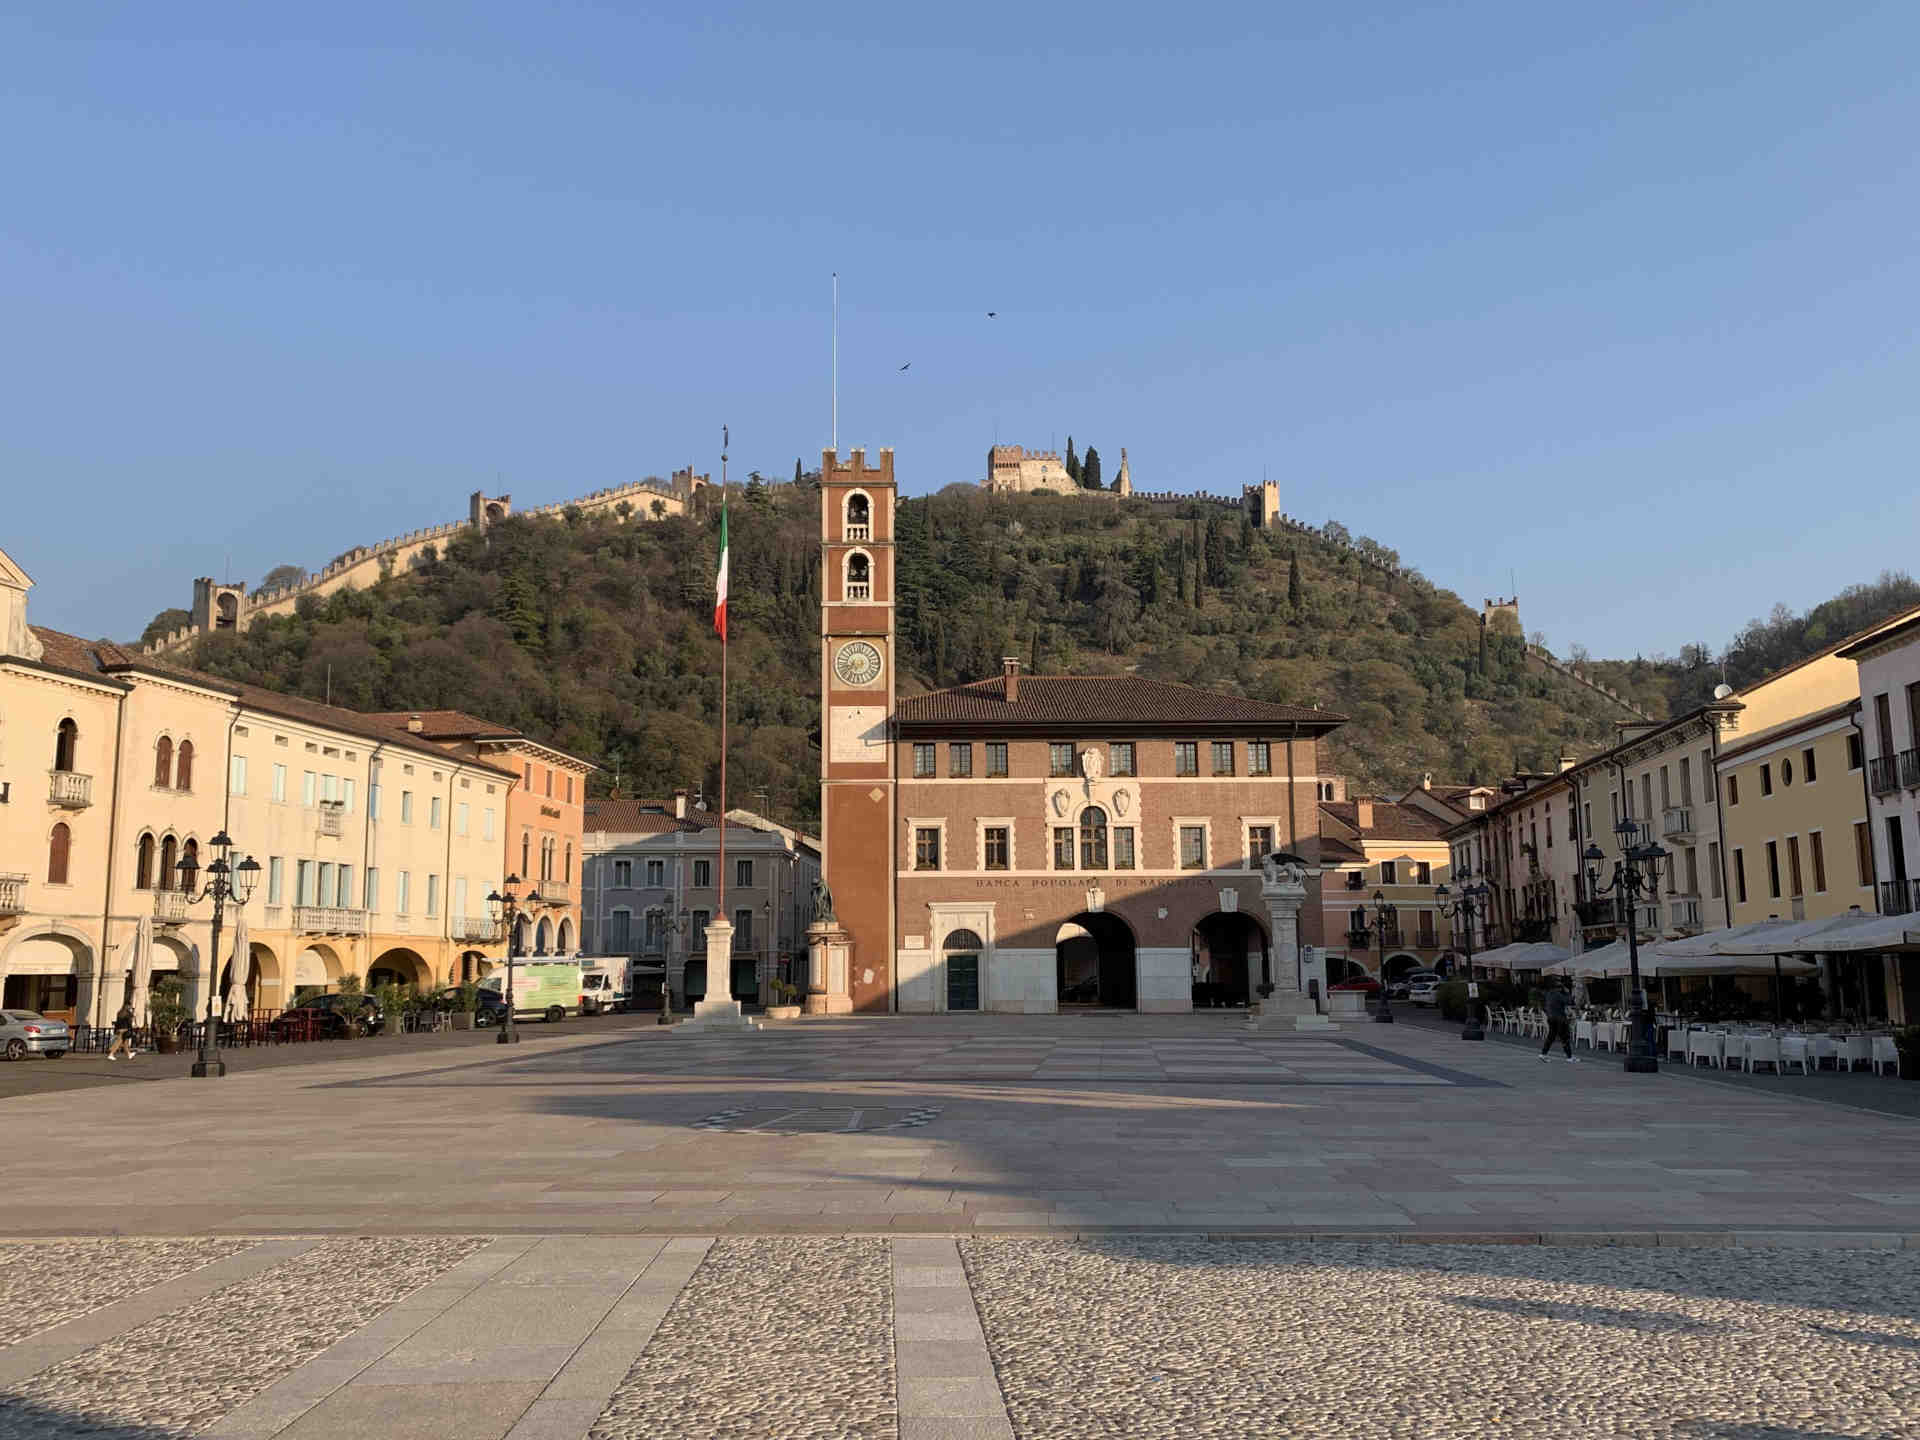 Photos of Marostica, Chess Square and Town Hall